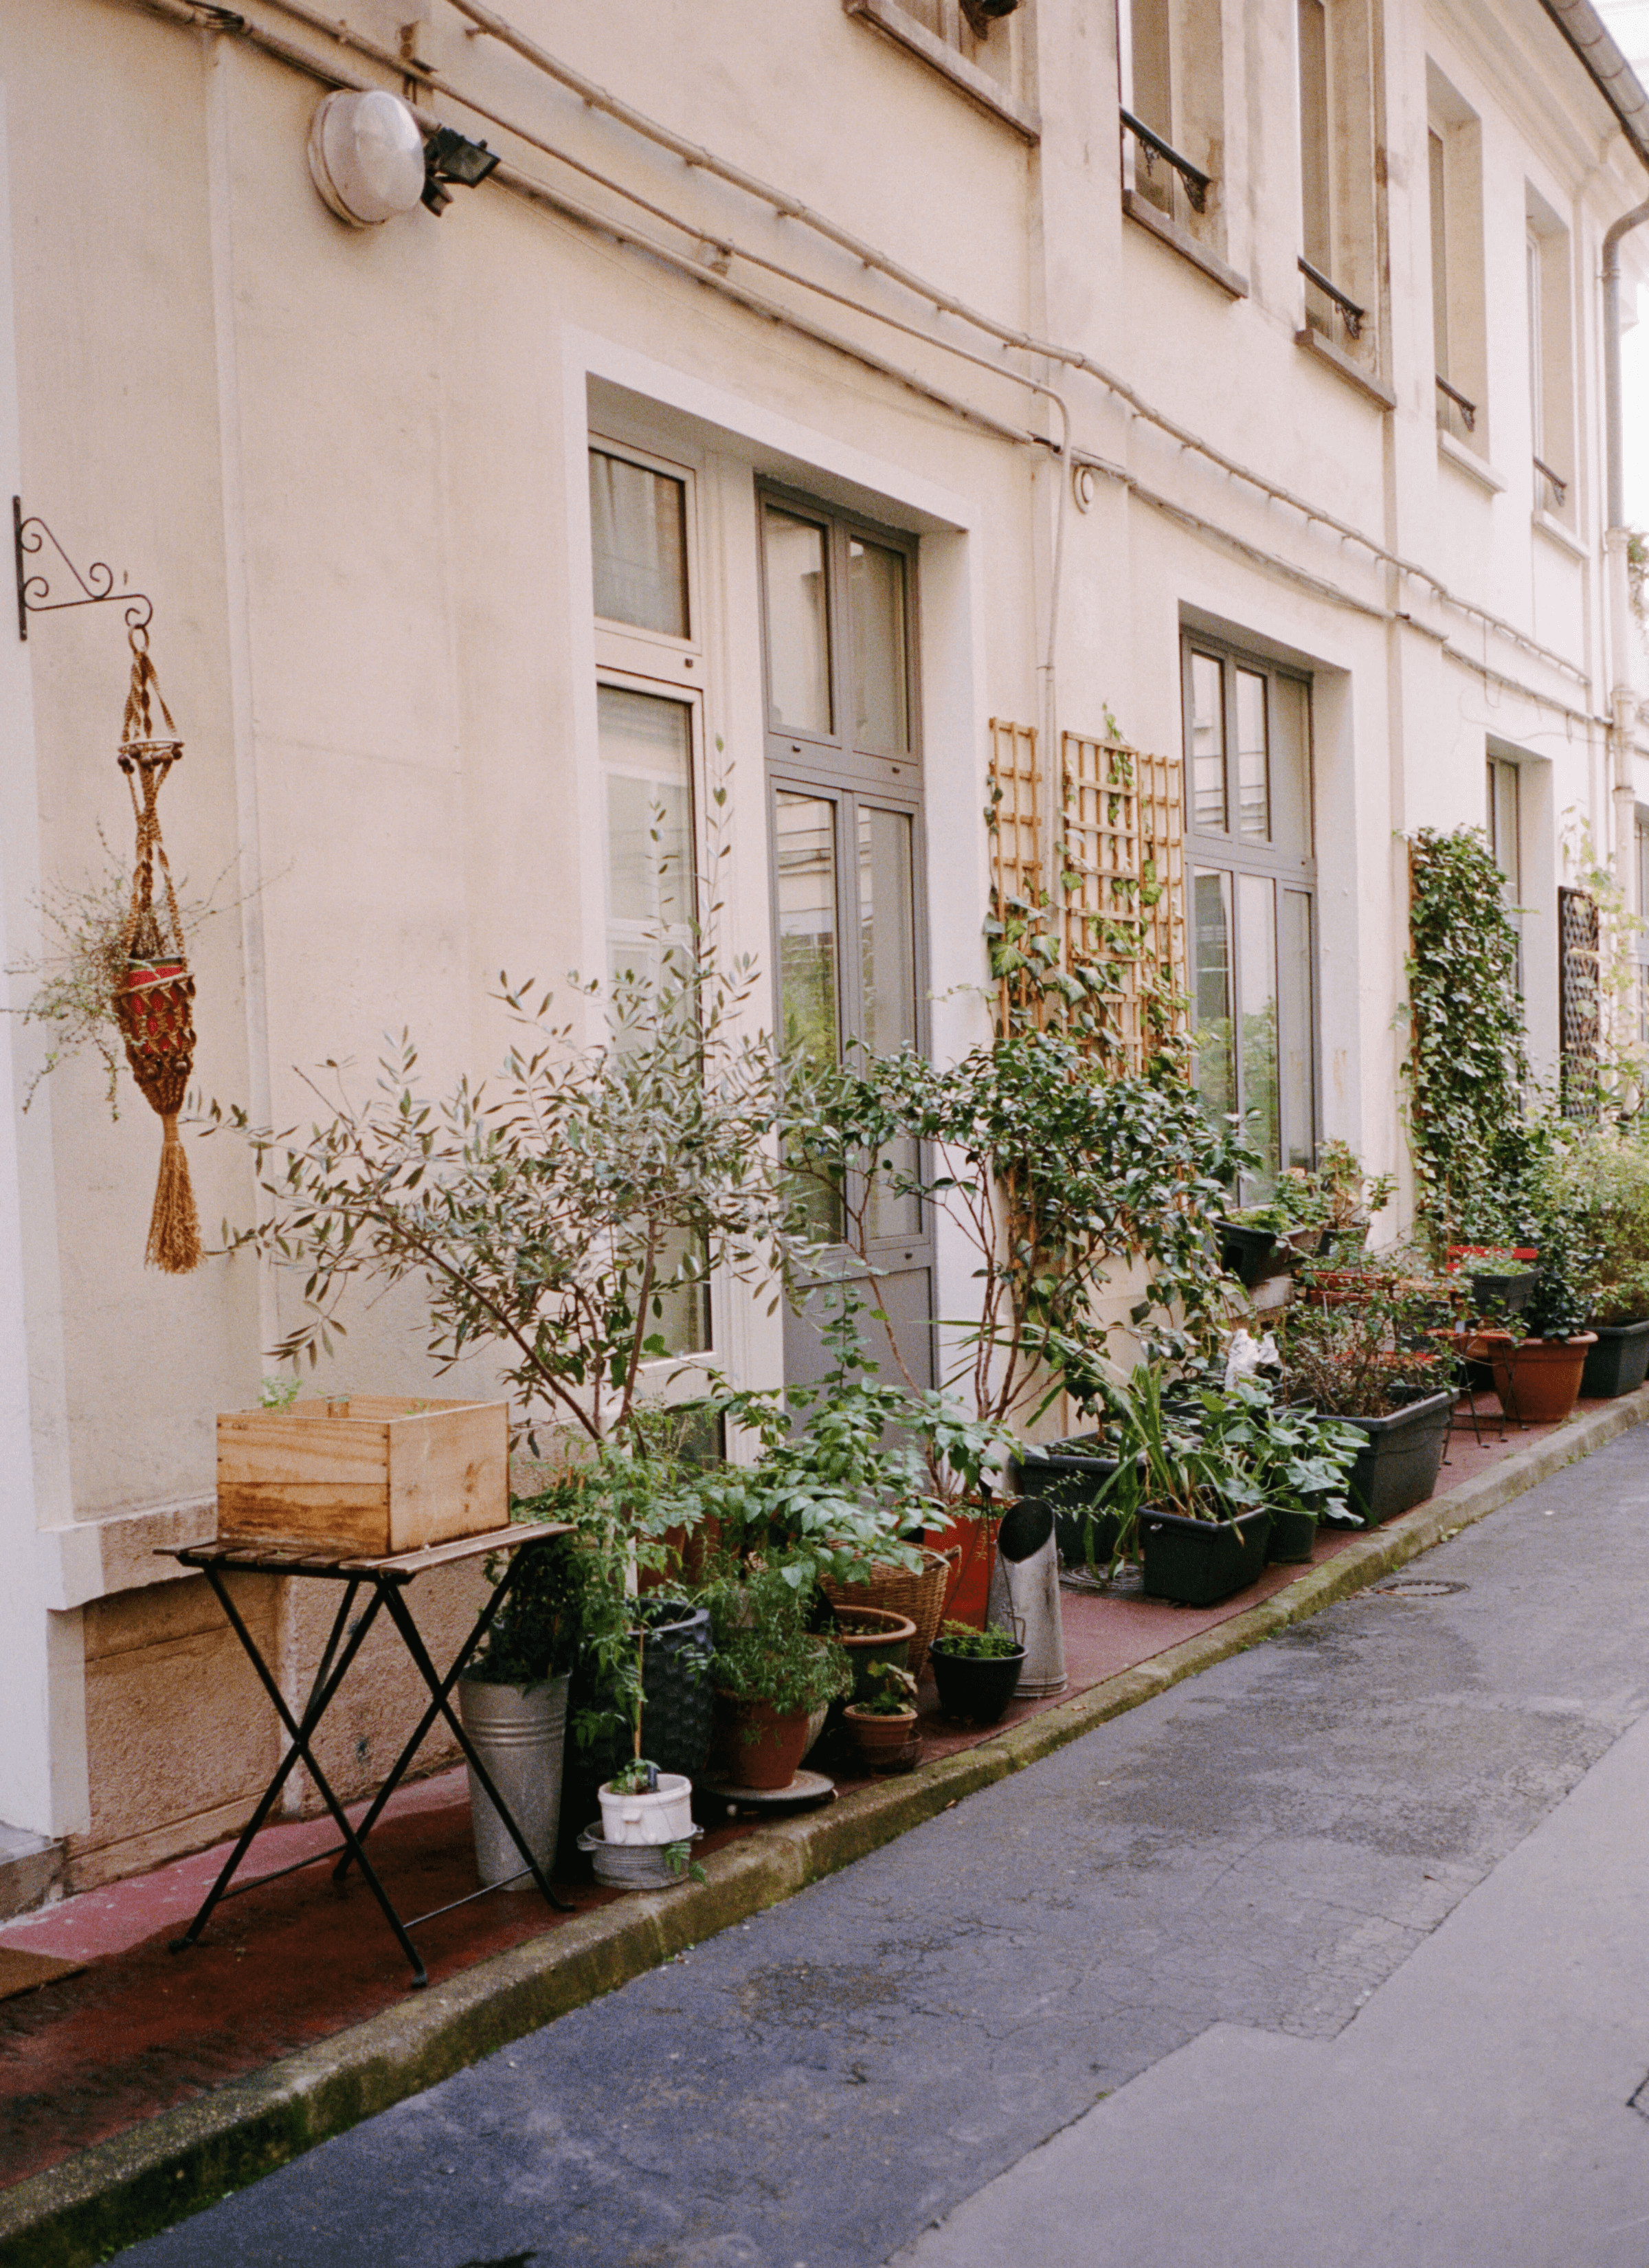 Street view photography. There are different kinds of potted plant along the street and some climb on the wall trellises.